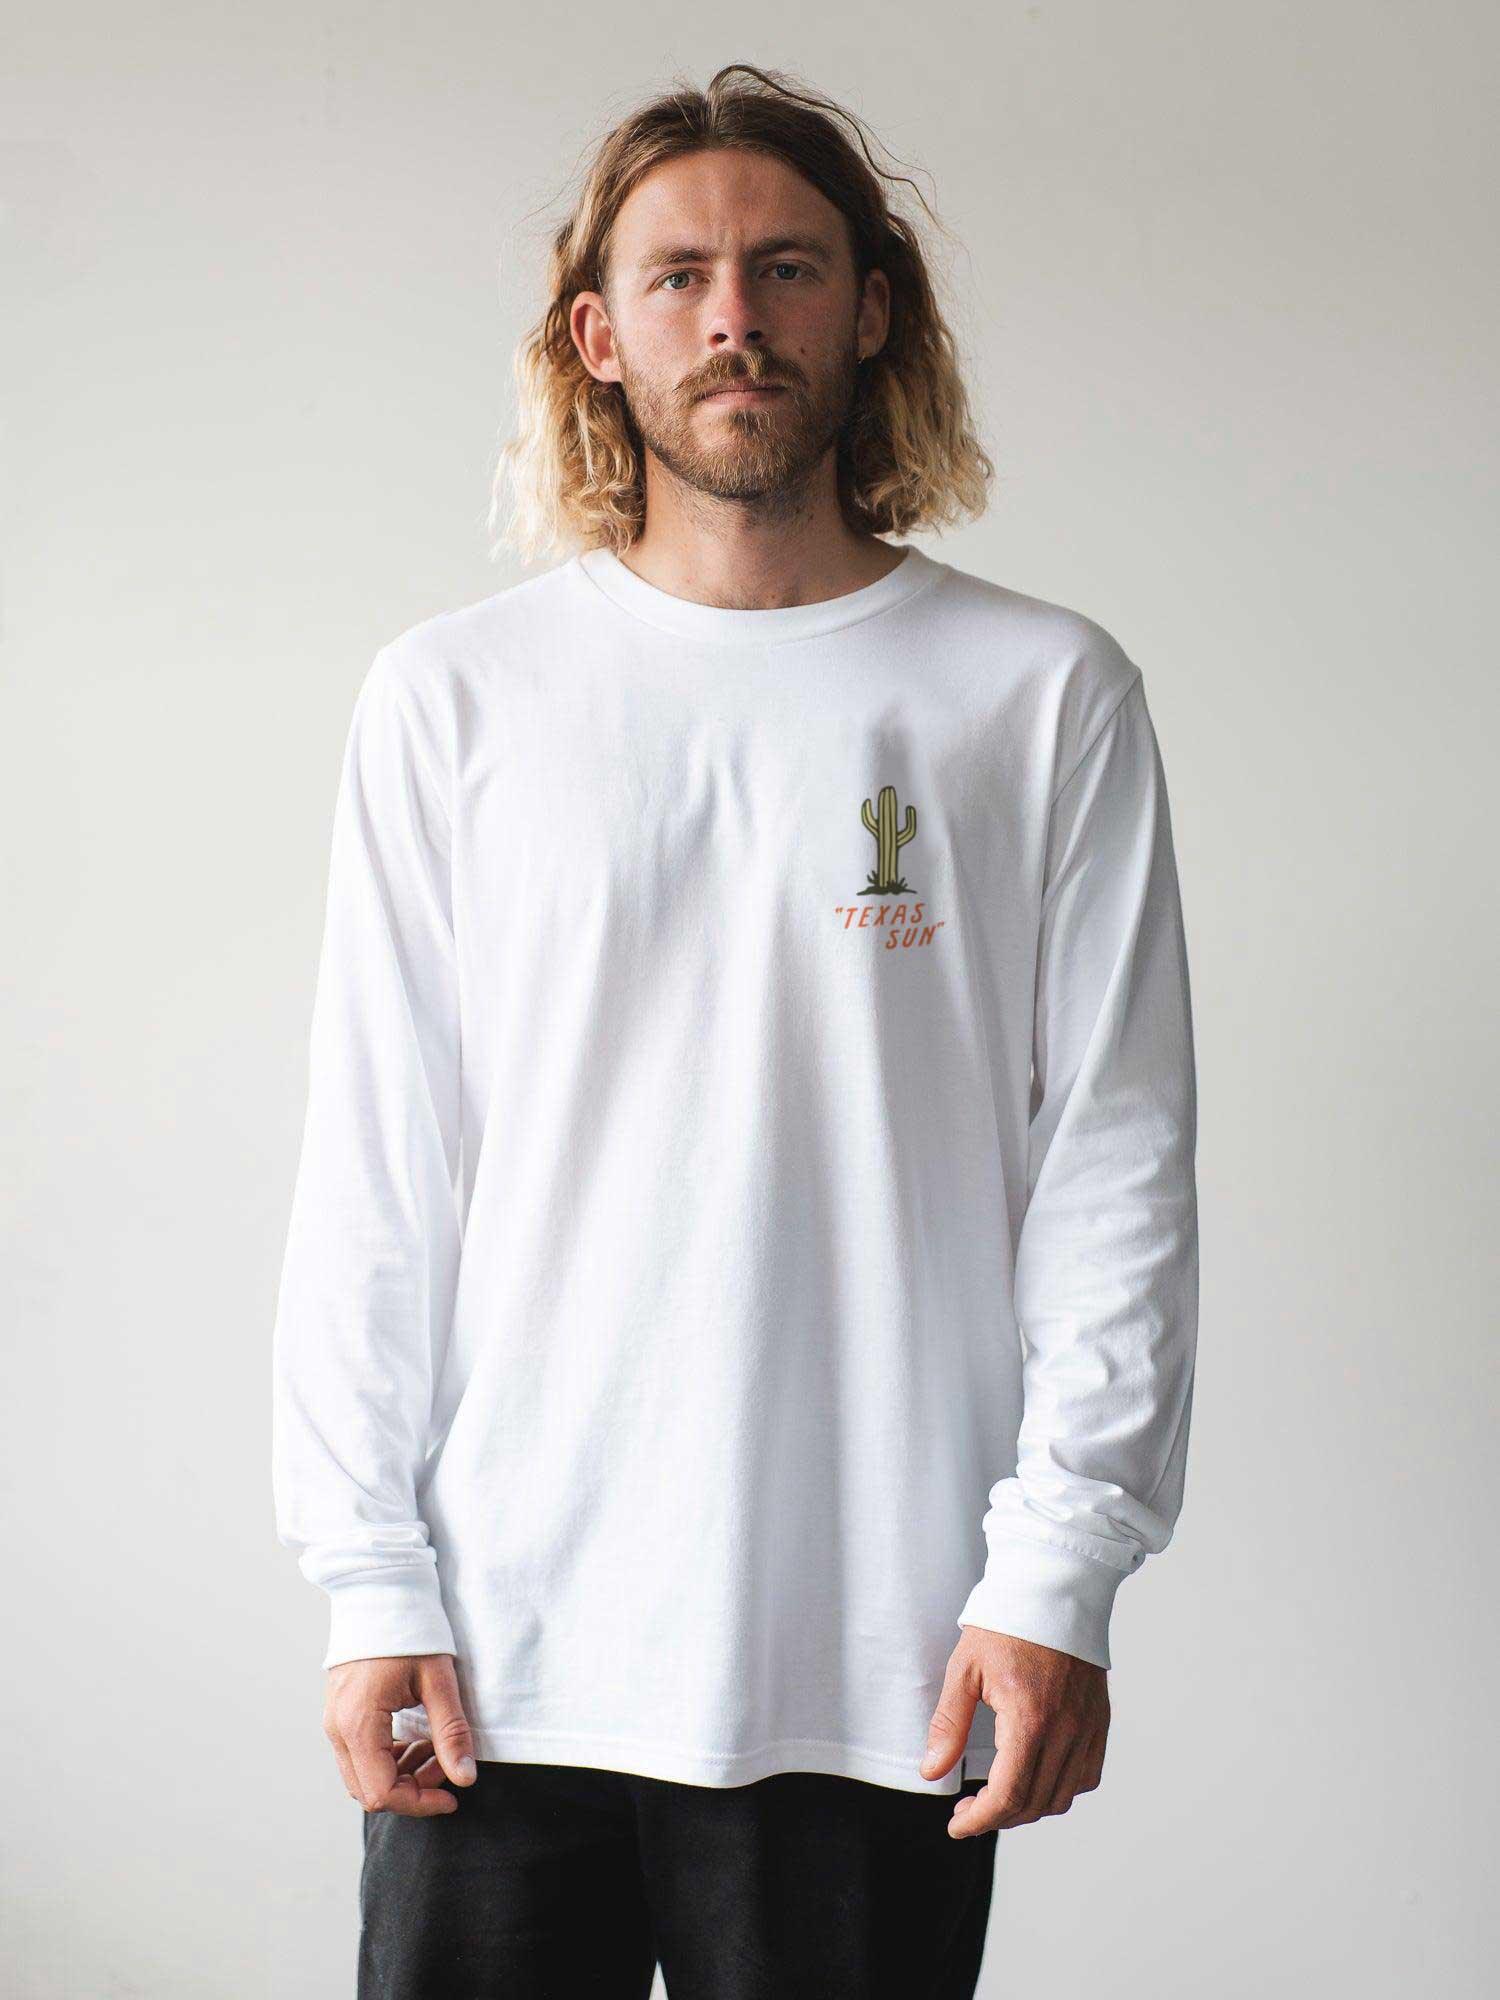 Texas Sun L/S T-Shirt - Watershed Brand